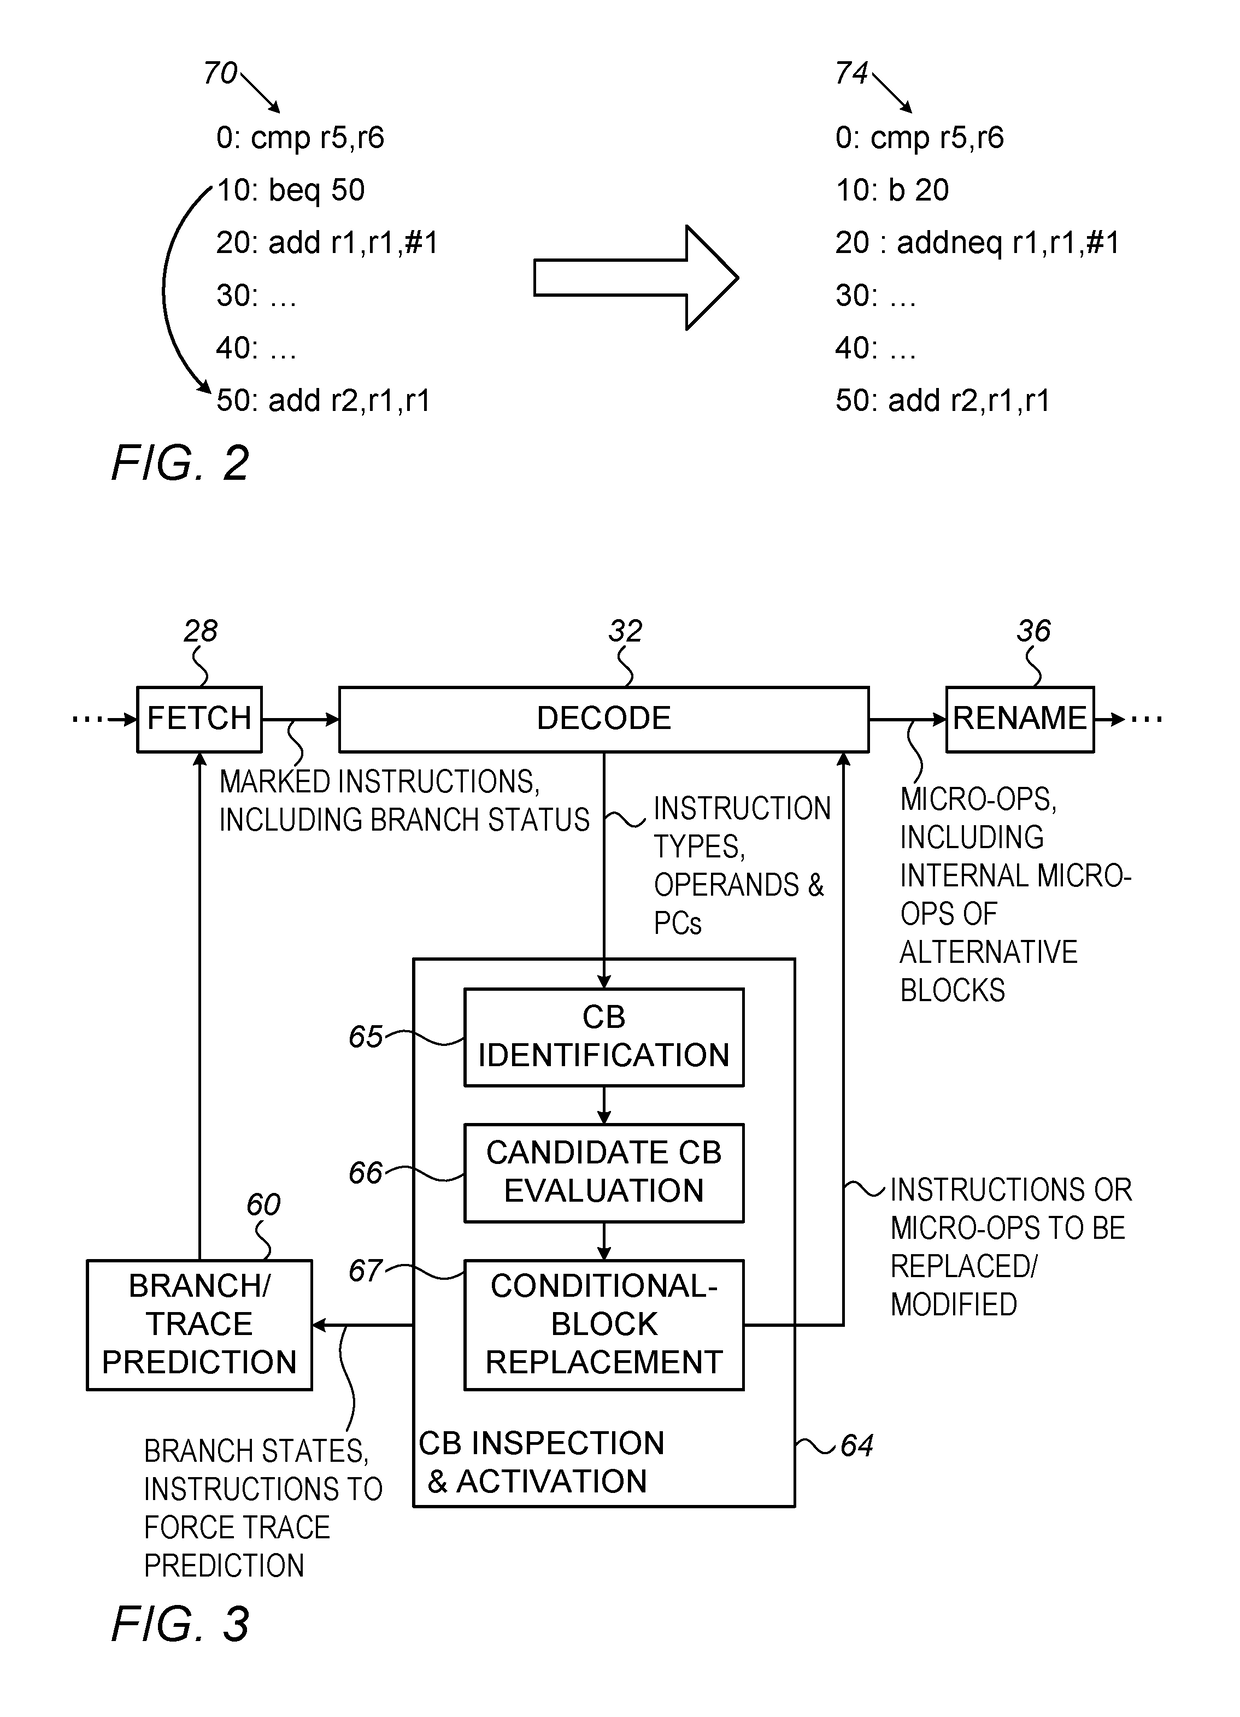 Hardware-based run-time mitigation of conditional branches